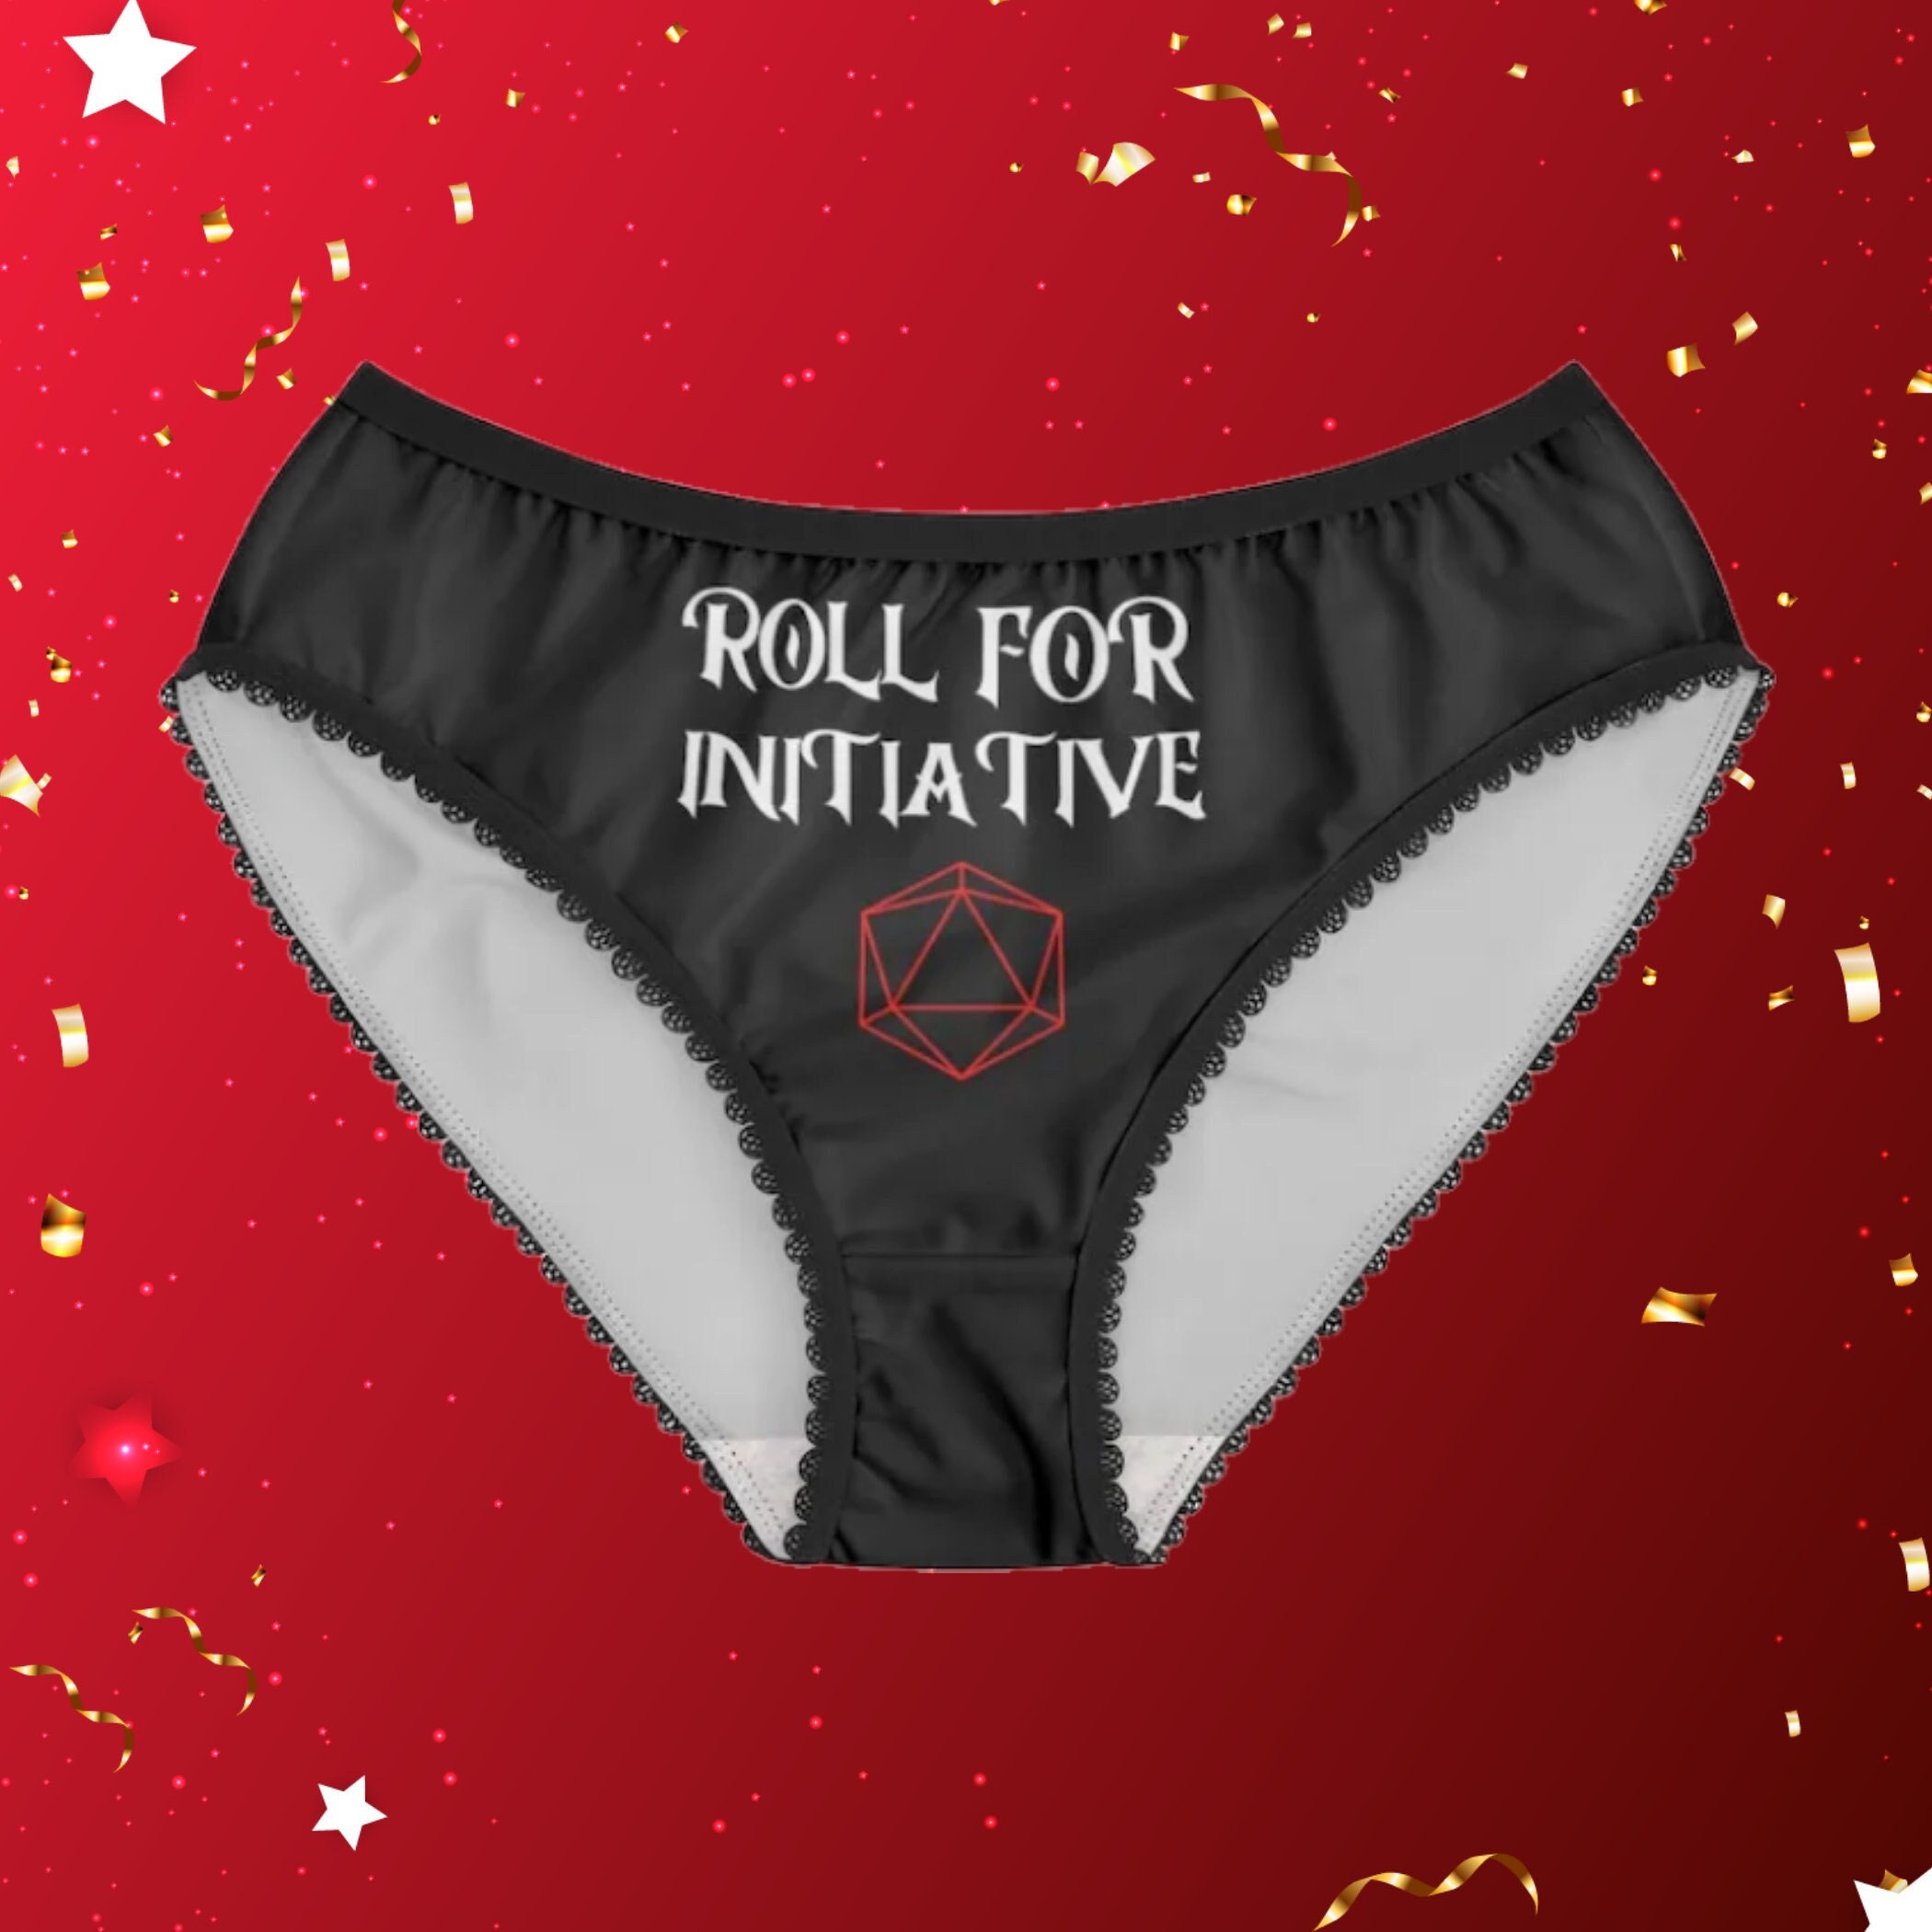 ROLL FOR INITIATIVE Women's Briefs Dungeons and Dragons Funny Meme Dnd  Underwear Wedding Anniversary Panties L Geek Gifts for Him Her 